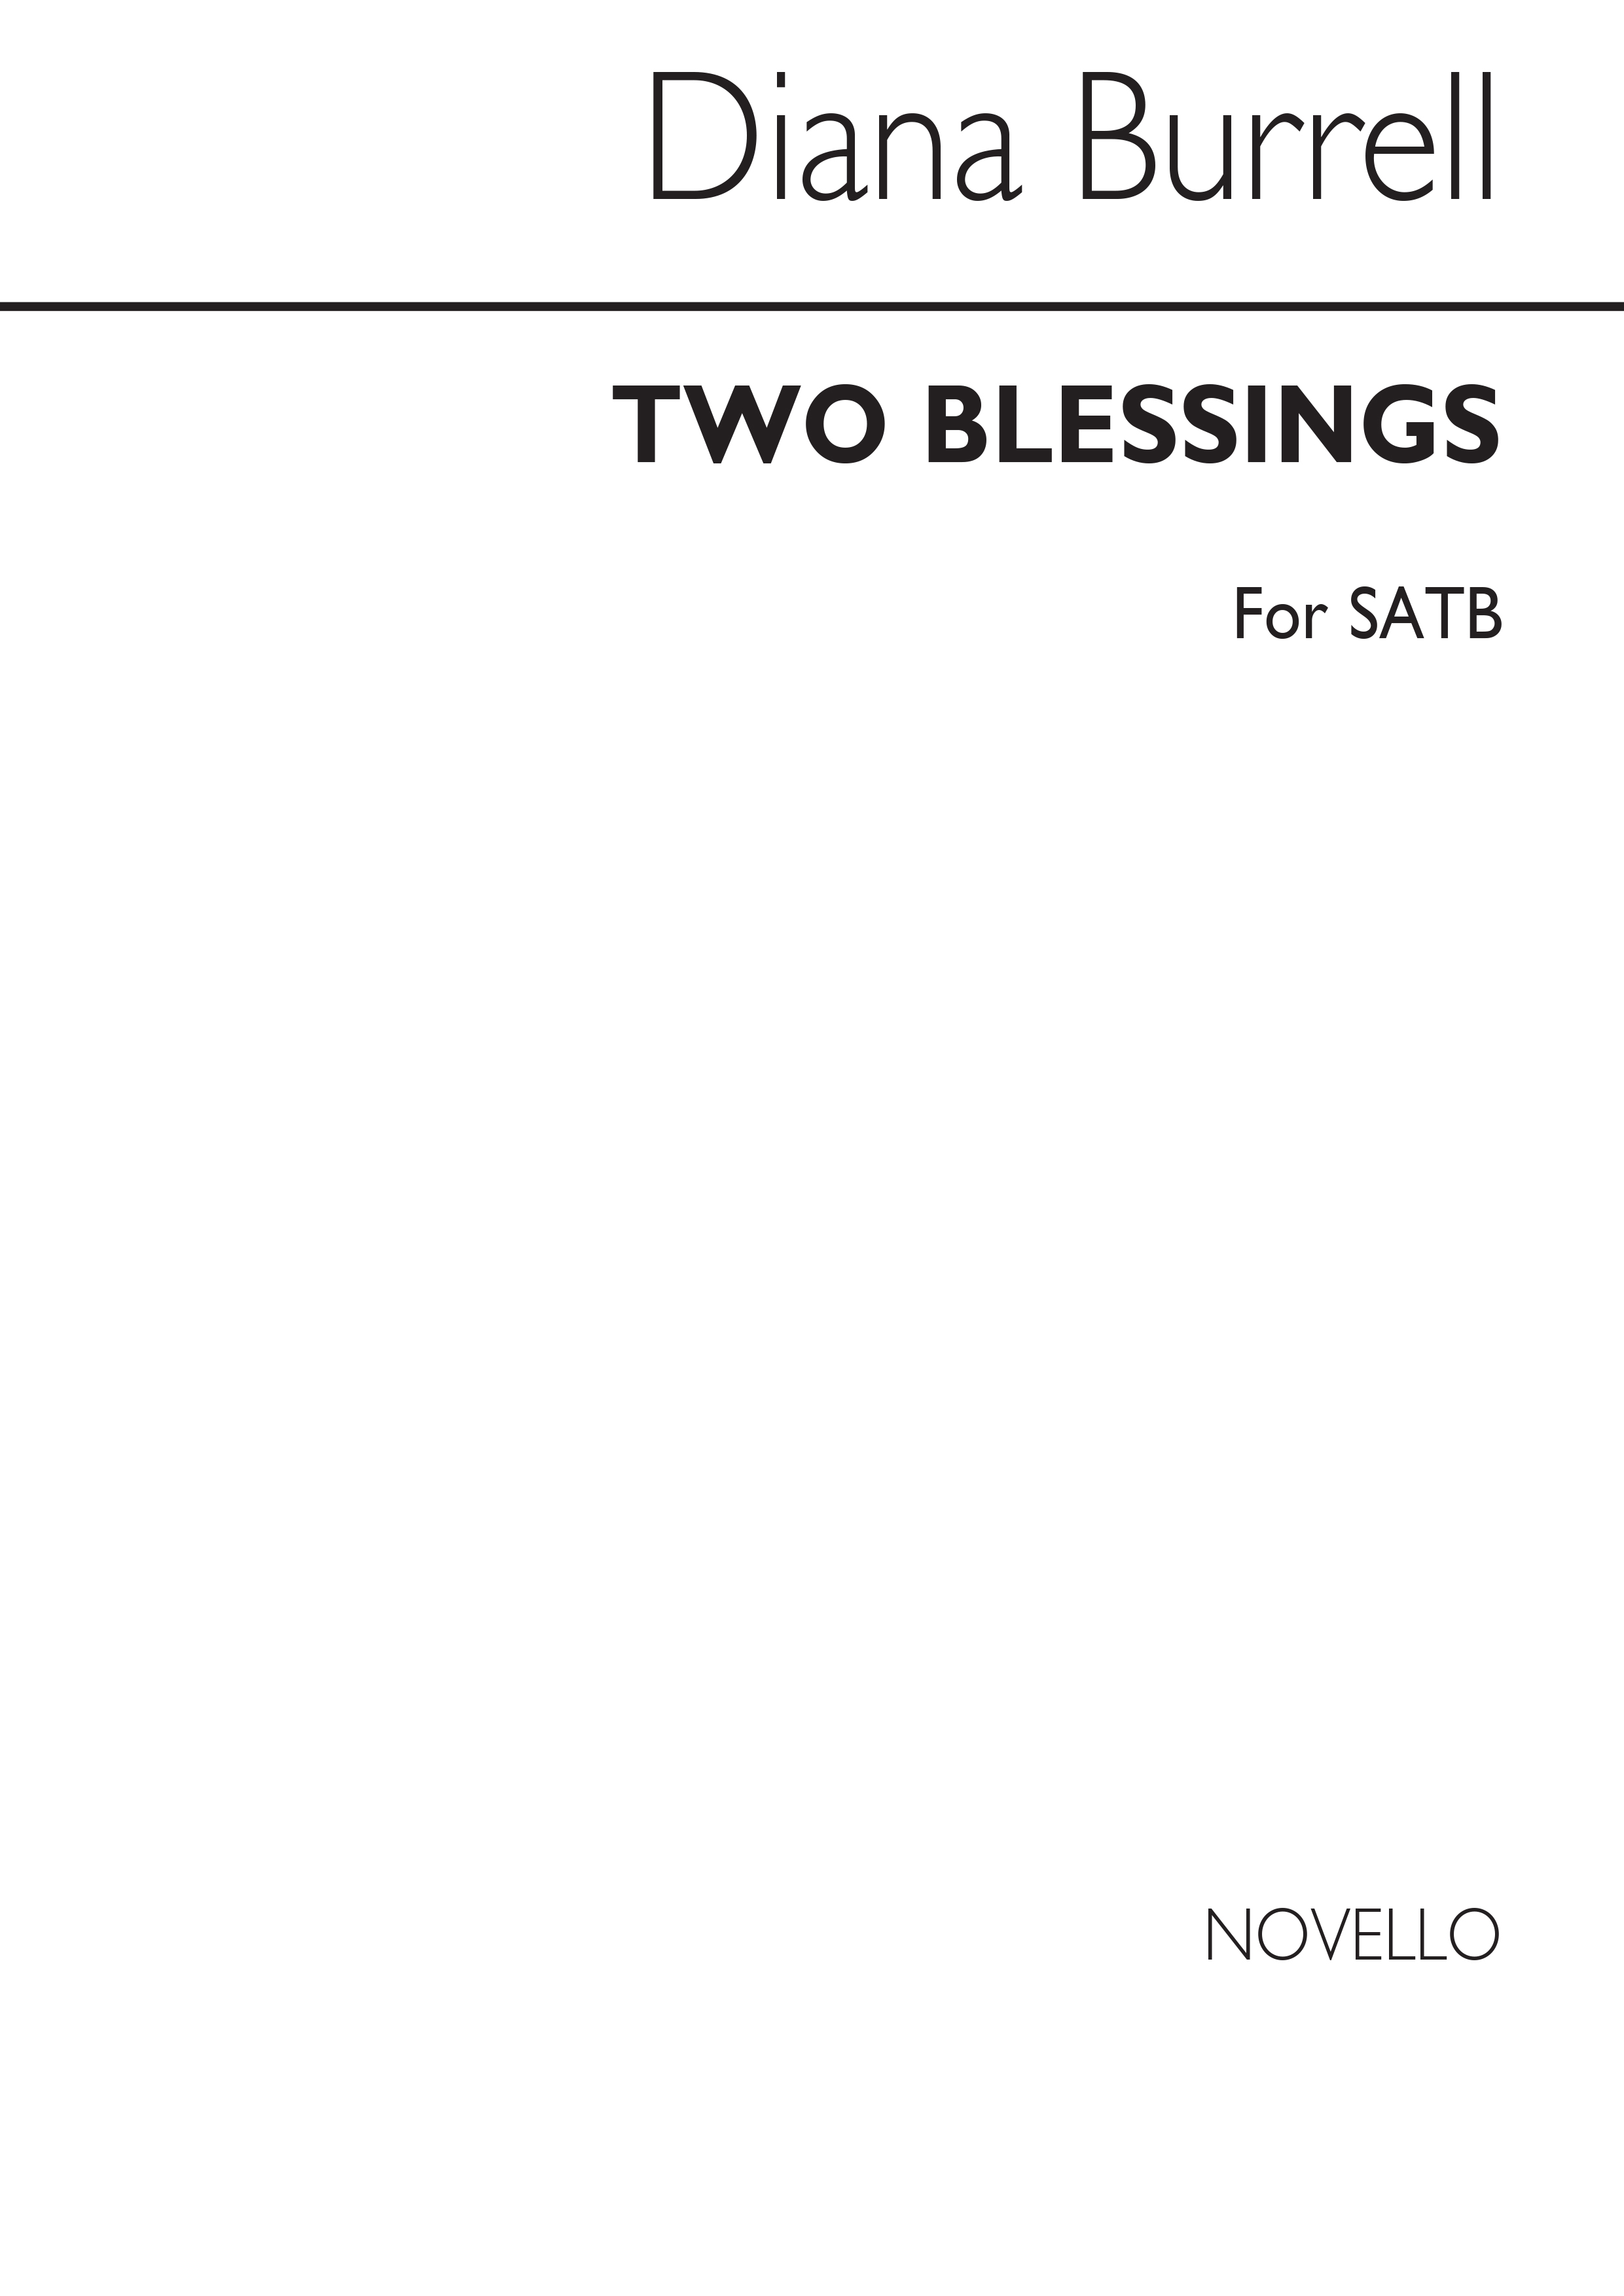 Burrell: Two Blessings for SATB Chorus